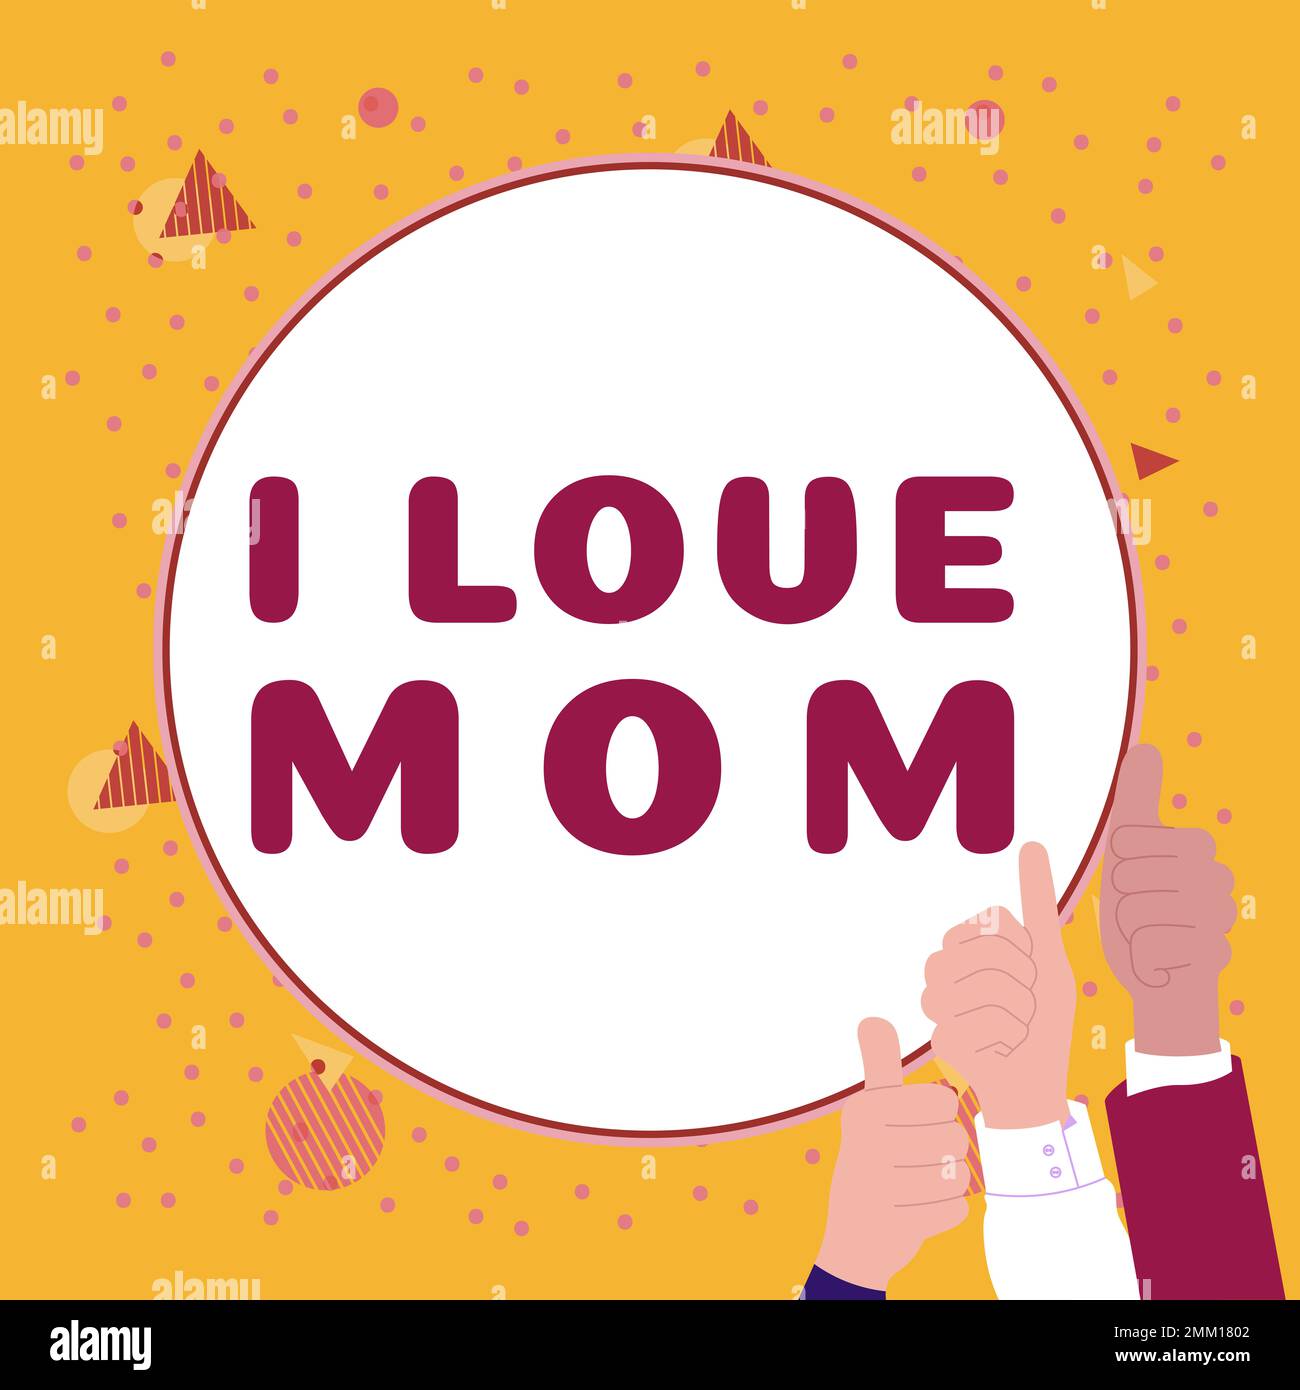 https://c8.alamy.com/comp/2MM1802/conceptual-caption-i-love-mom-conceptual-photo-good-feelings-about-my-mother-affection-loving-happiness-2MM1802.jpg